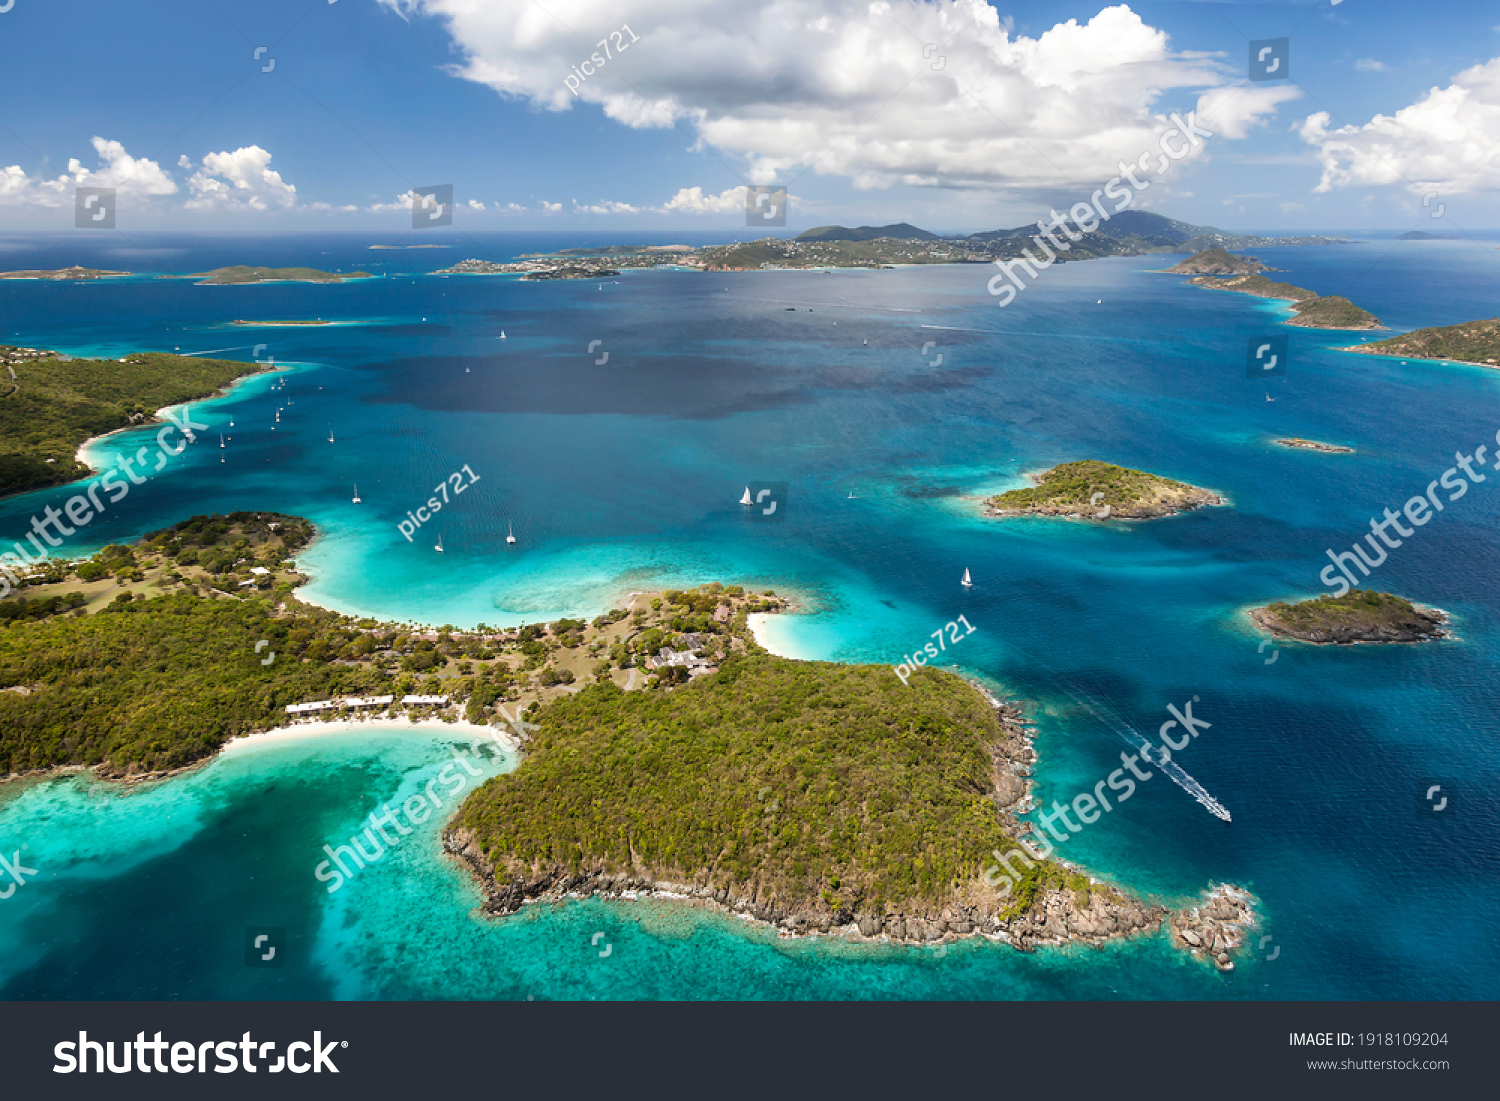 Aerial view of Caneel Bay on the island of St. John with St. Thomas in the distance in the United States Virgin Islands. #1918109204